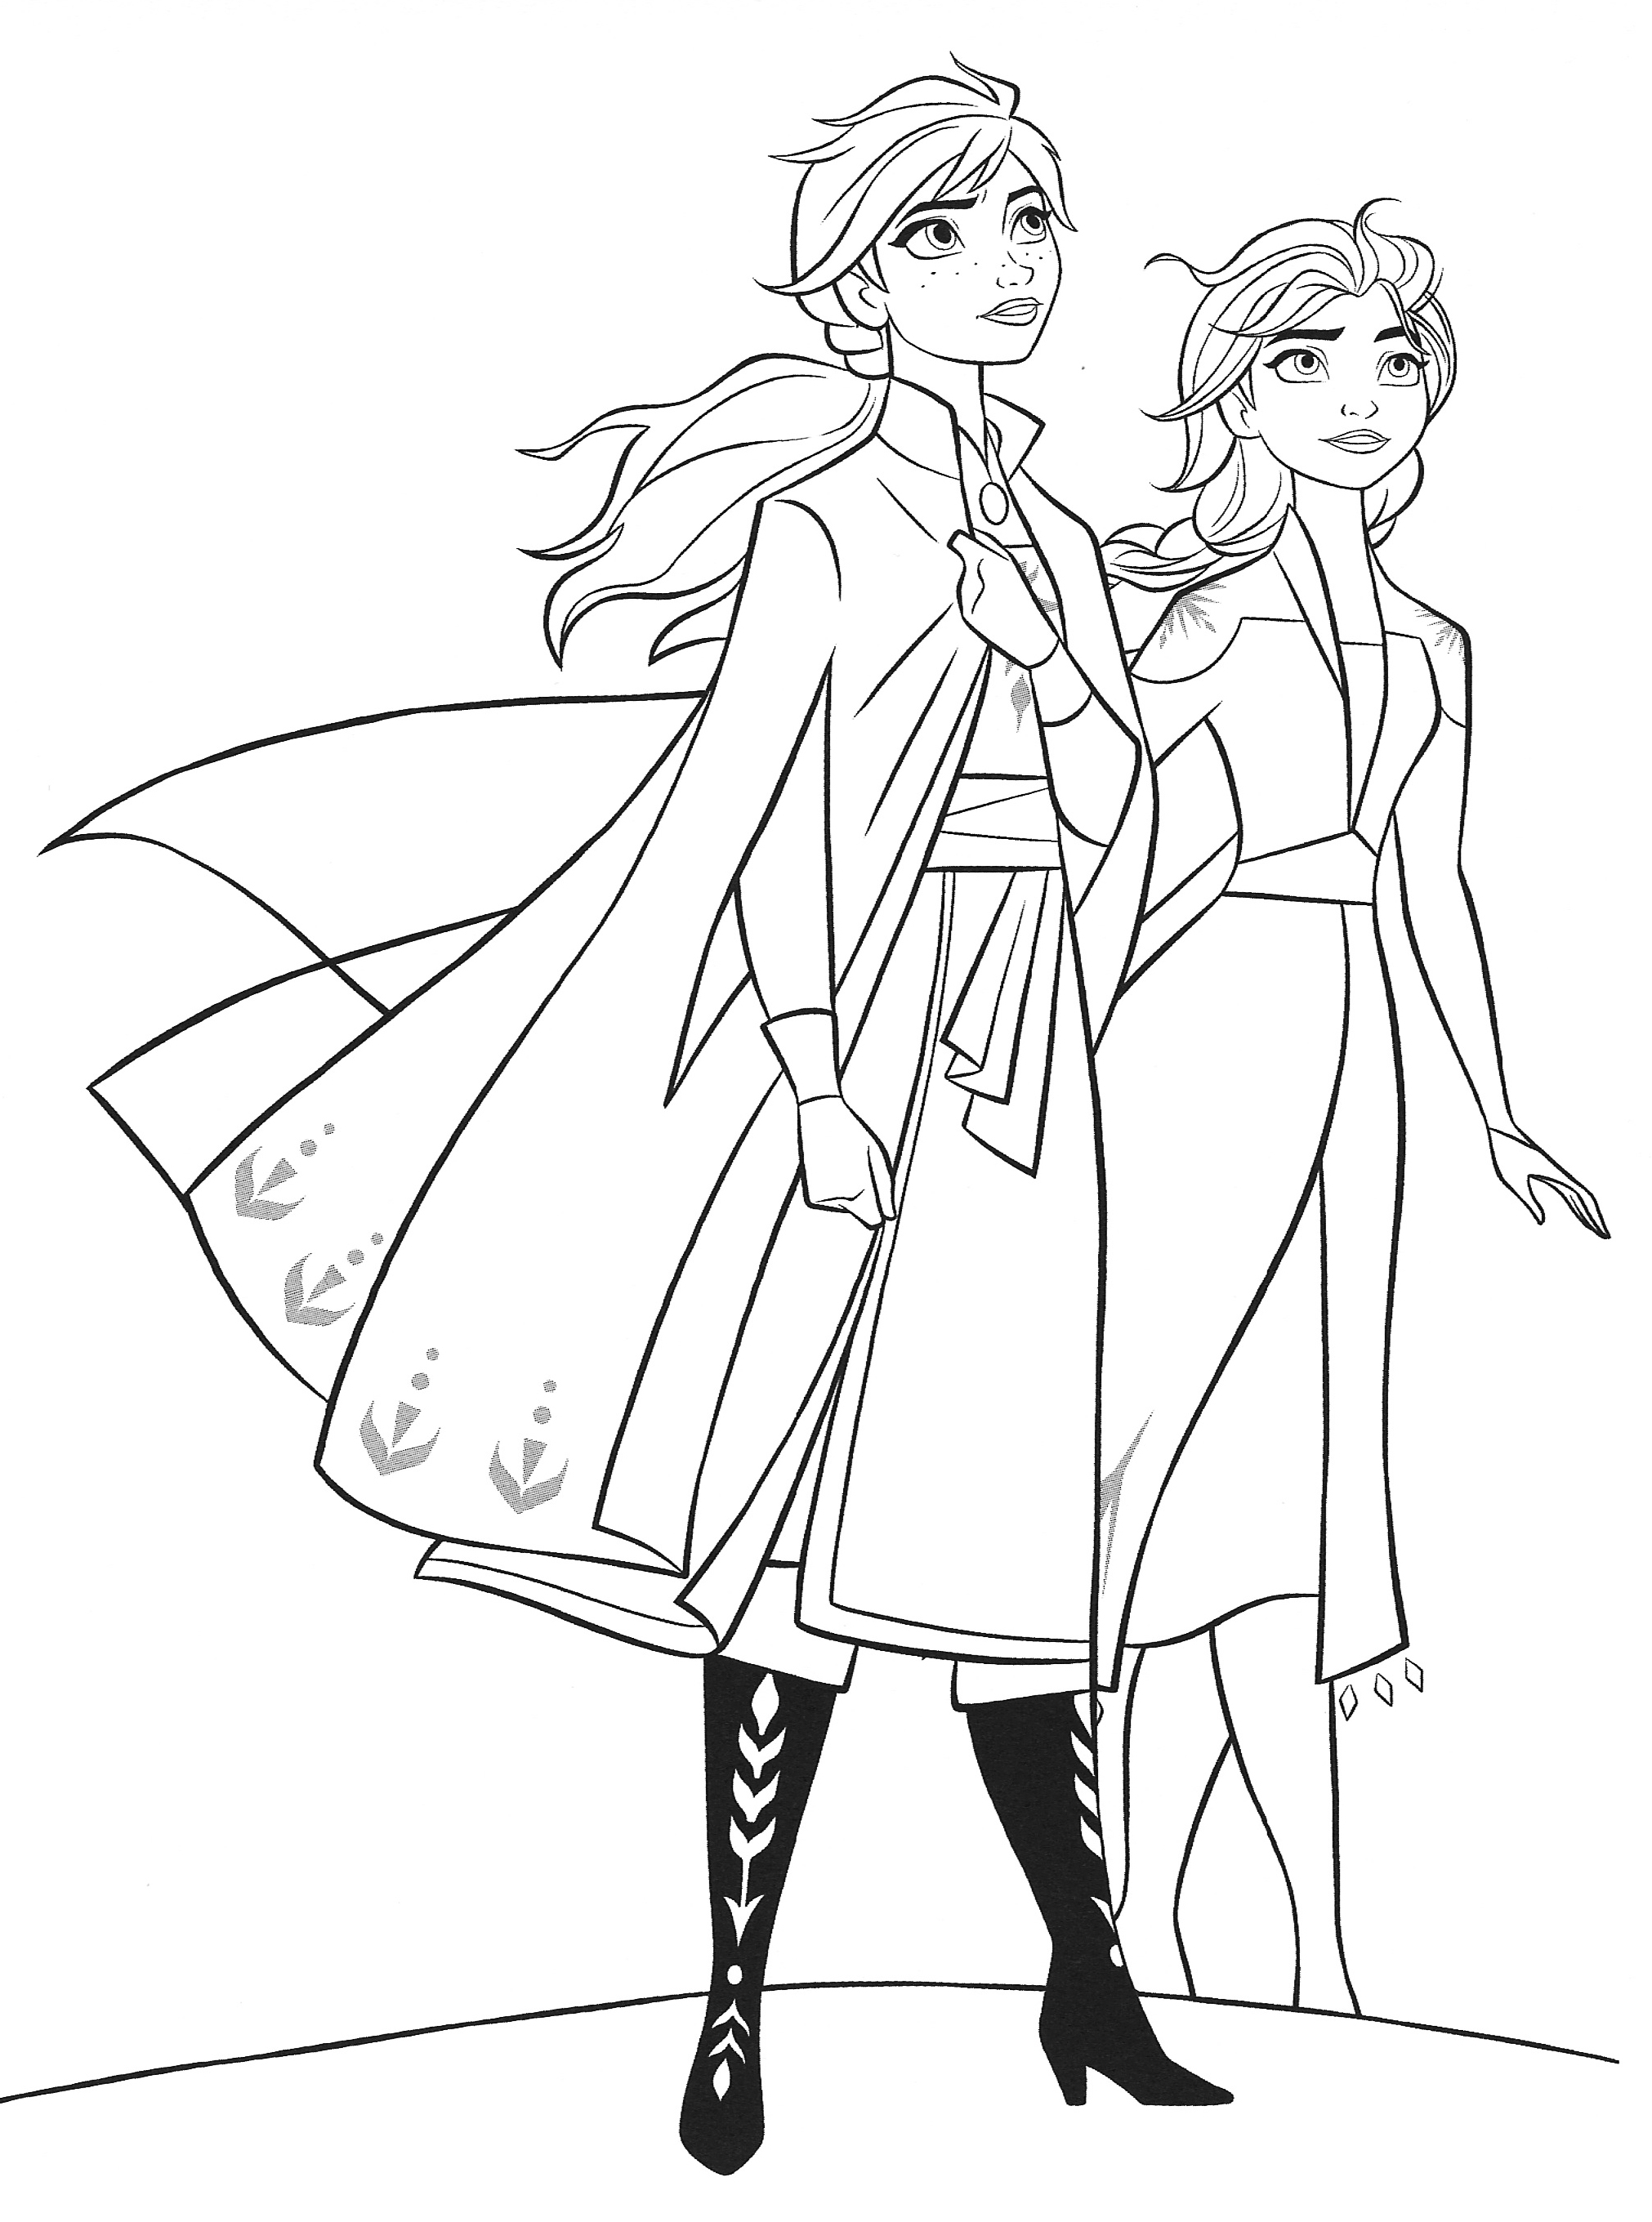 frozen 2 elsa and anna coloring pages youloveit com